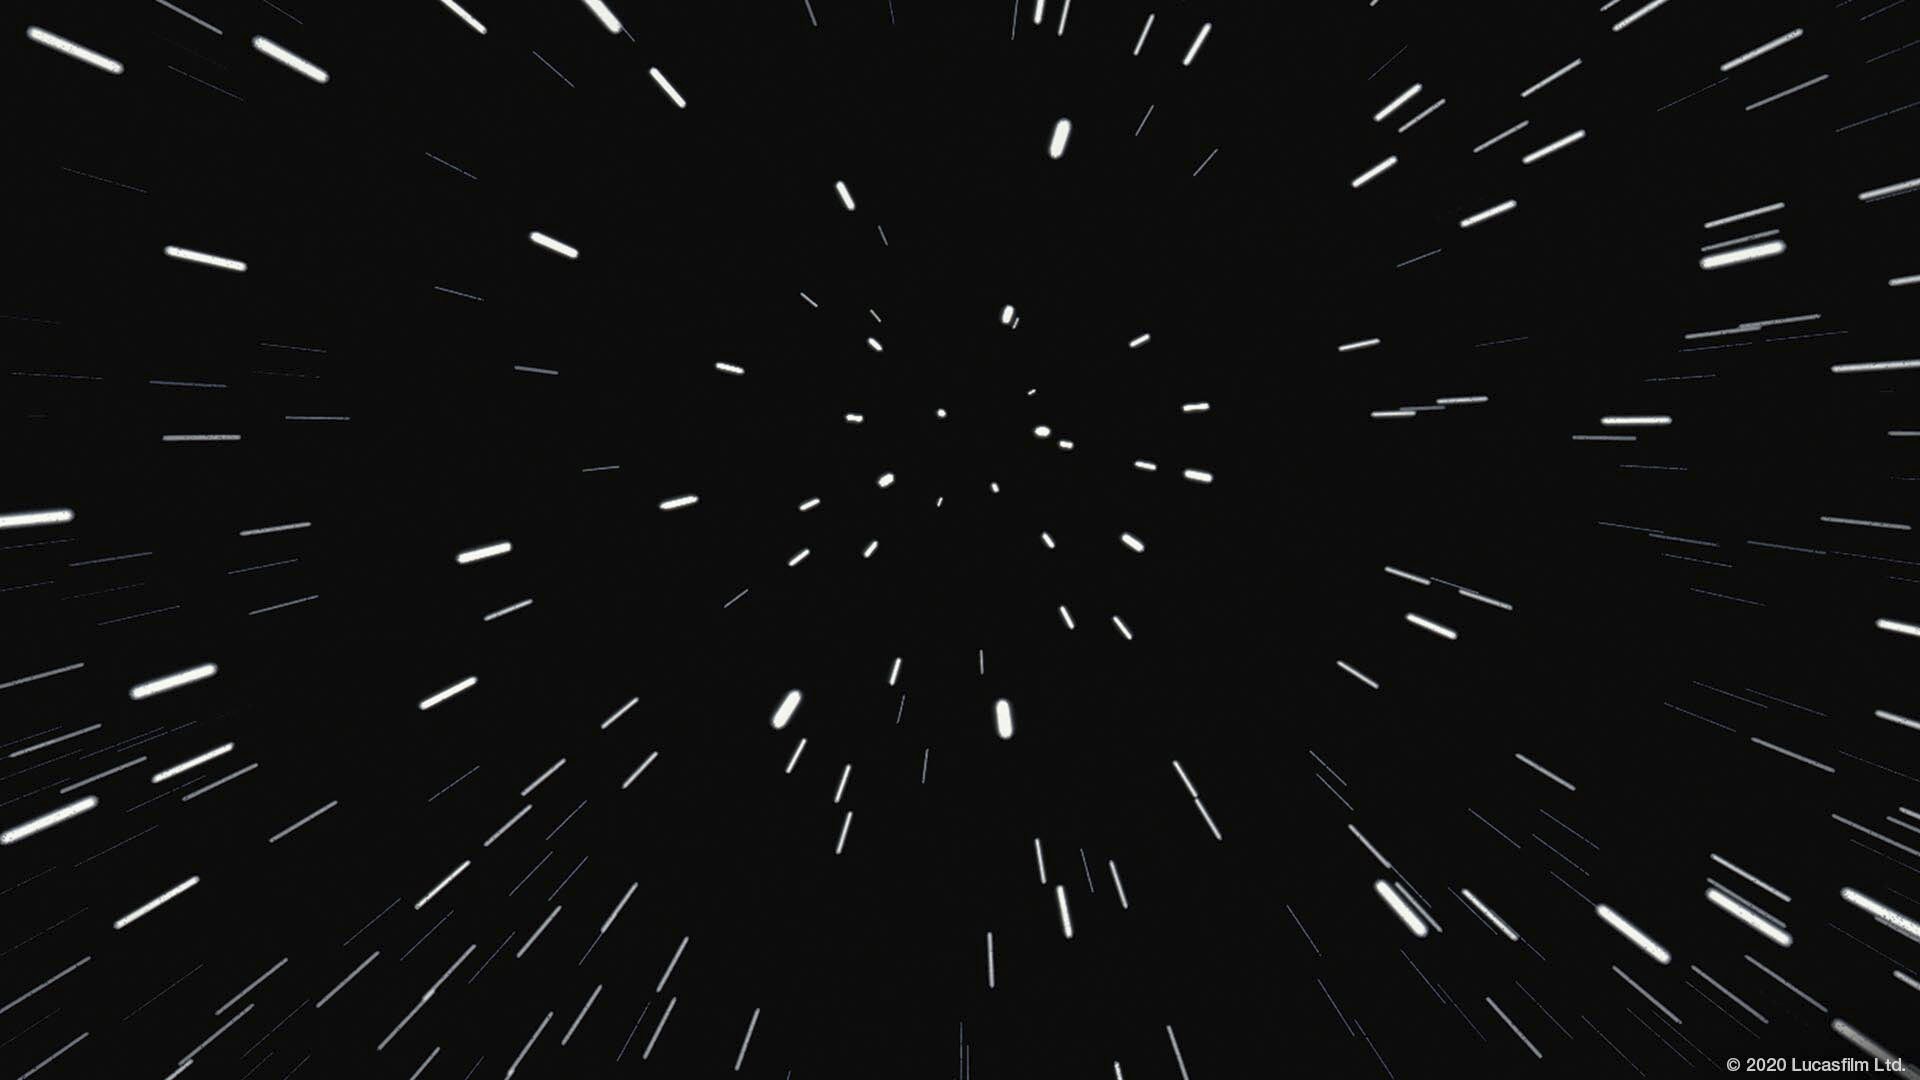 Star Wars Backgrounds for Video Calls & Meetings 